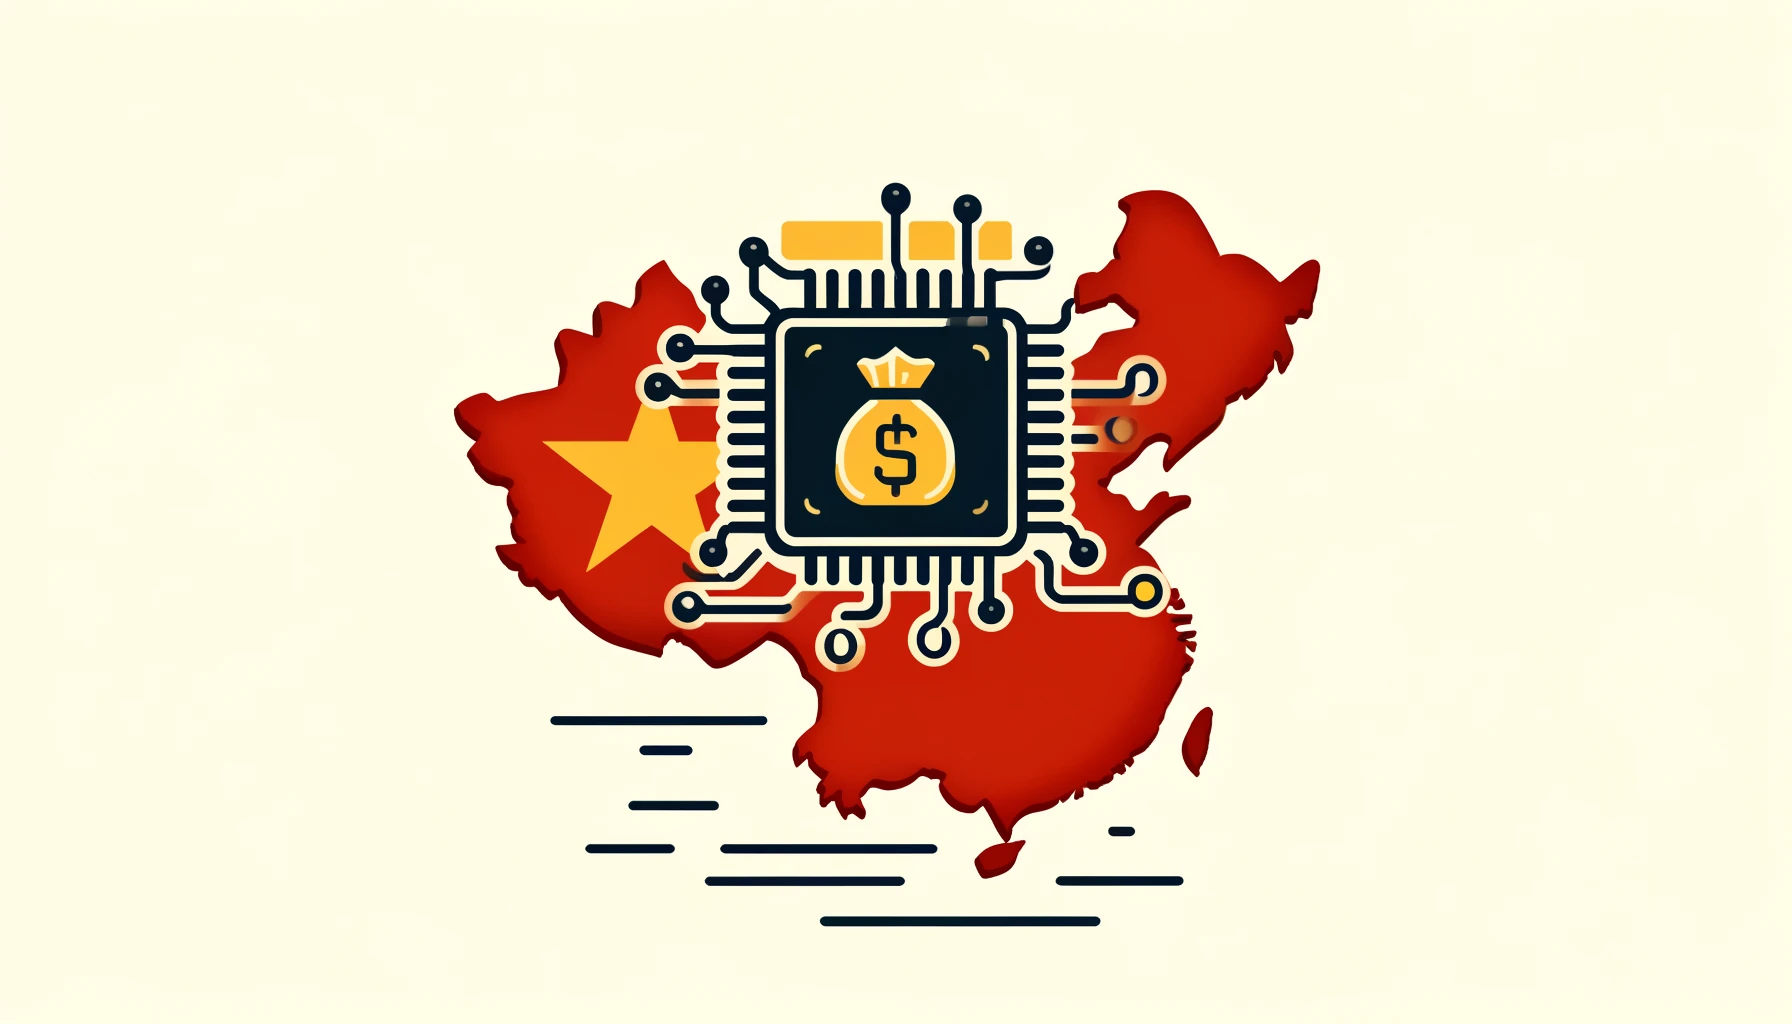 China Establishes $47.5 Billion Semiconductor Fund to Support Domestic Companies